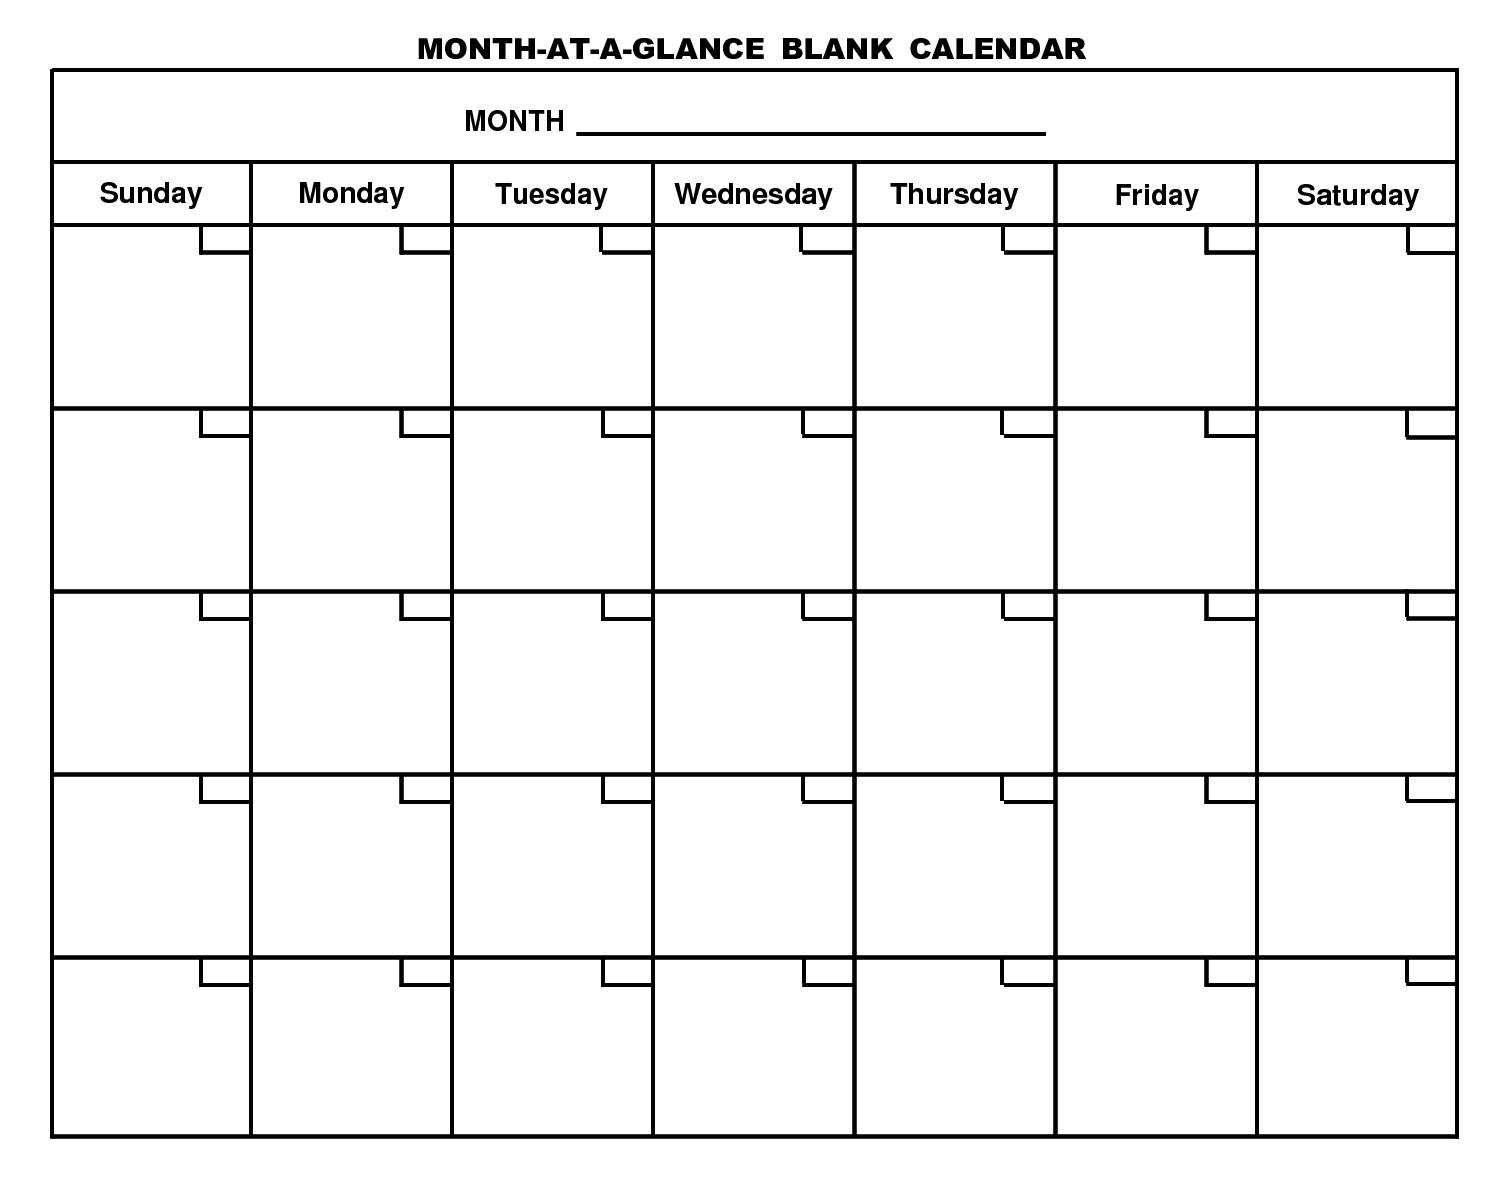 Month At A Glance Blank Calendar Template - Dalep.midnightpig.co Pertaining To Month At A Glance Blank Calendar Template